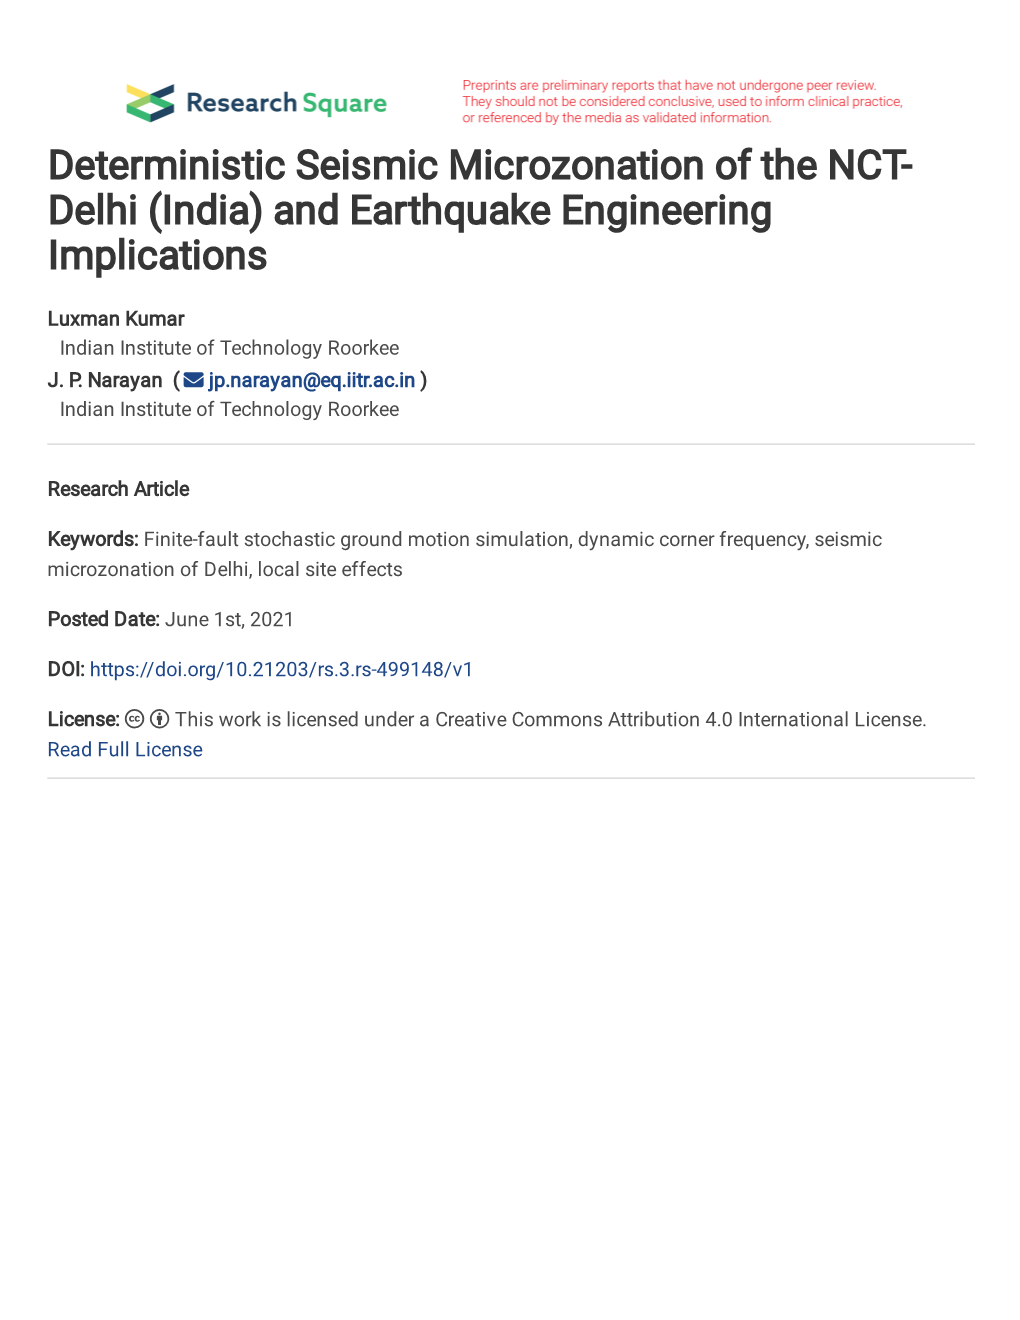 Deterministic Seismic Microzonation of the NCT- Delhi (India) and Earthquake Engineering Implications